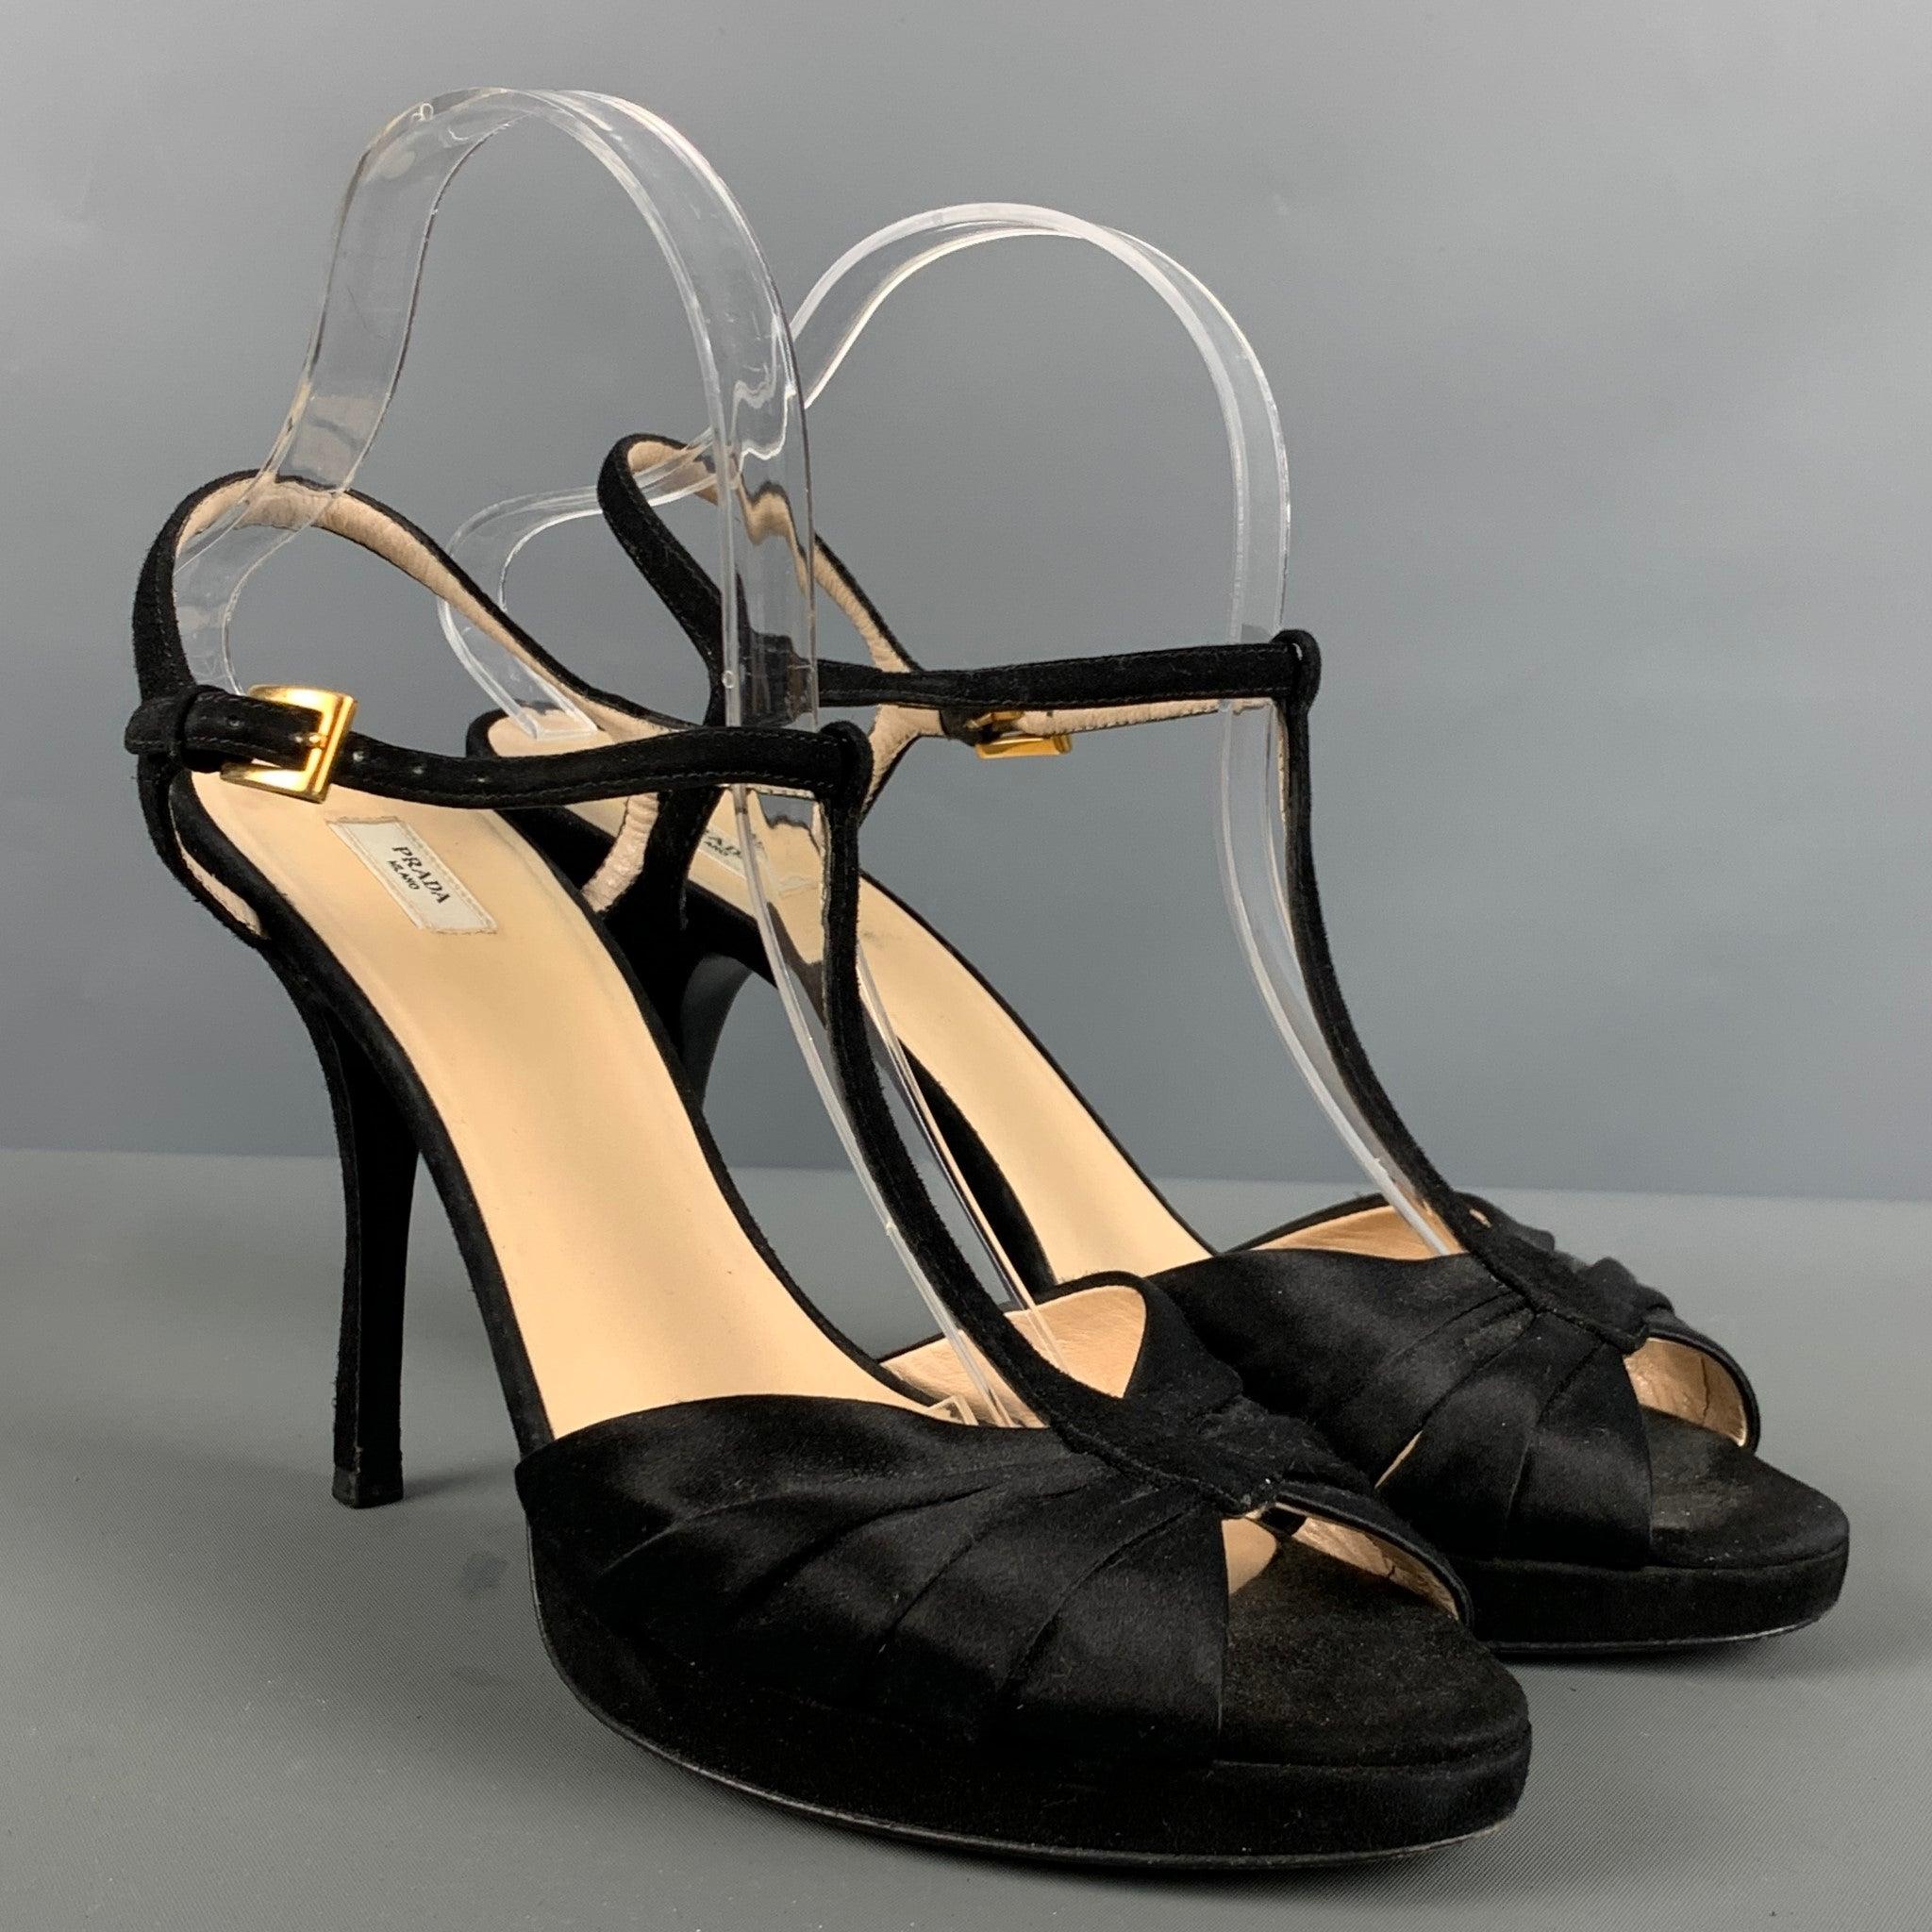 PRADA sandal heels comes in a black suede featuring a T-ankle strap, peep toe, and a stiletto heel. Made in Italy.Very Good Pre-Owned Condition. Minor signs of wear. 

Marked:   40 

Measurements: 
  Heel: 5 inches  
  
  
 
Reference: